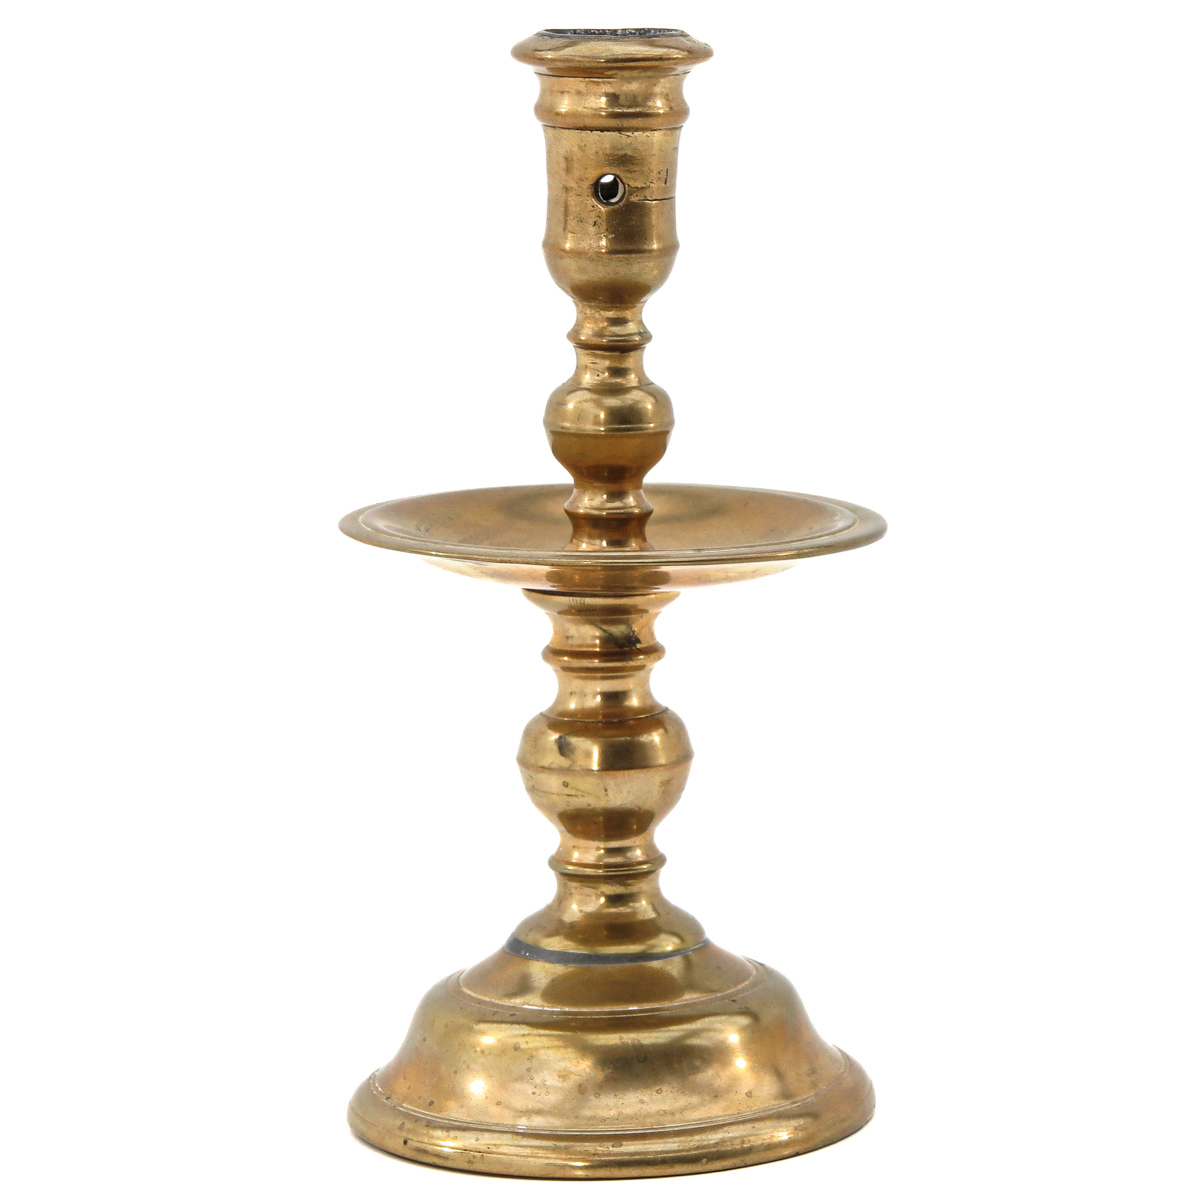 A 17th Century Bronze Candlestick - Image 4 of 8